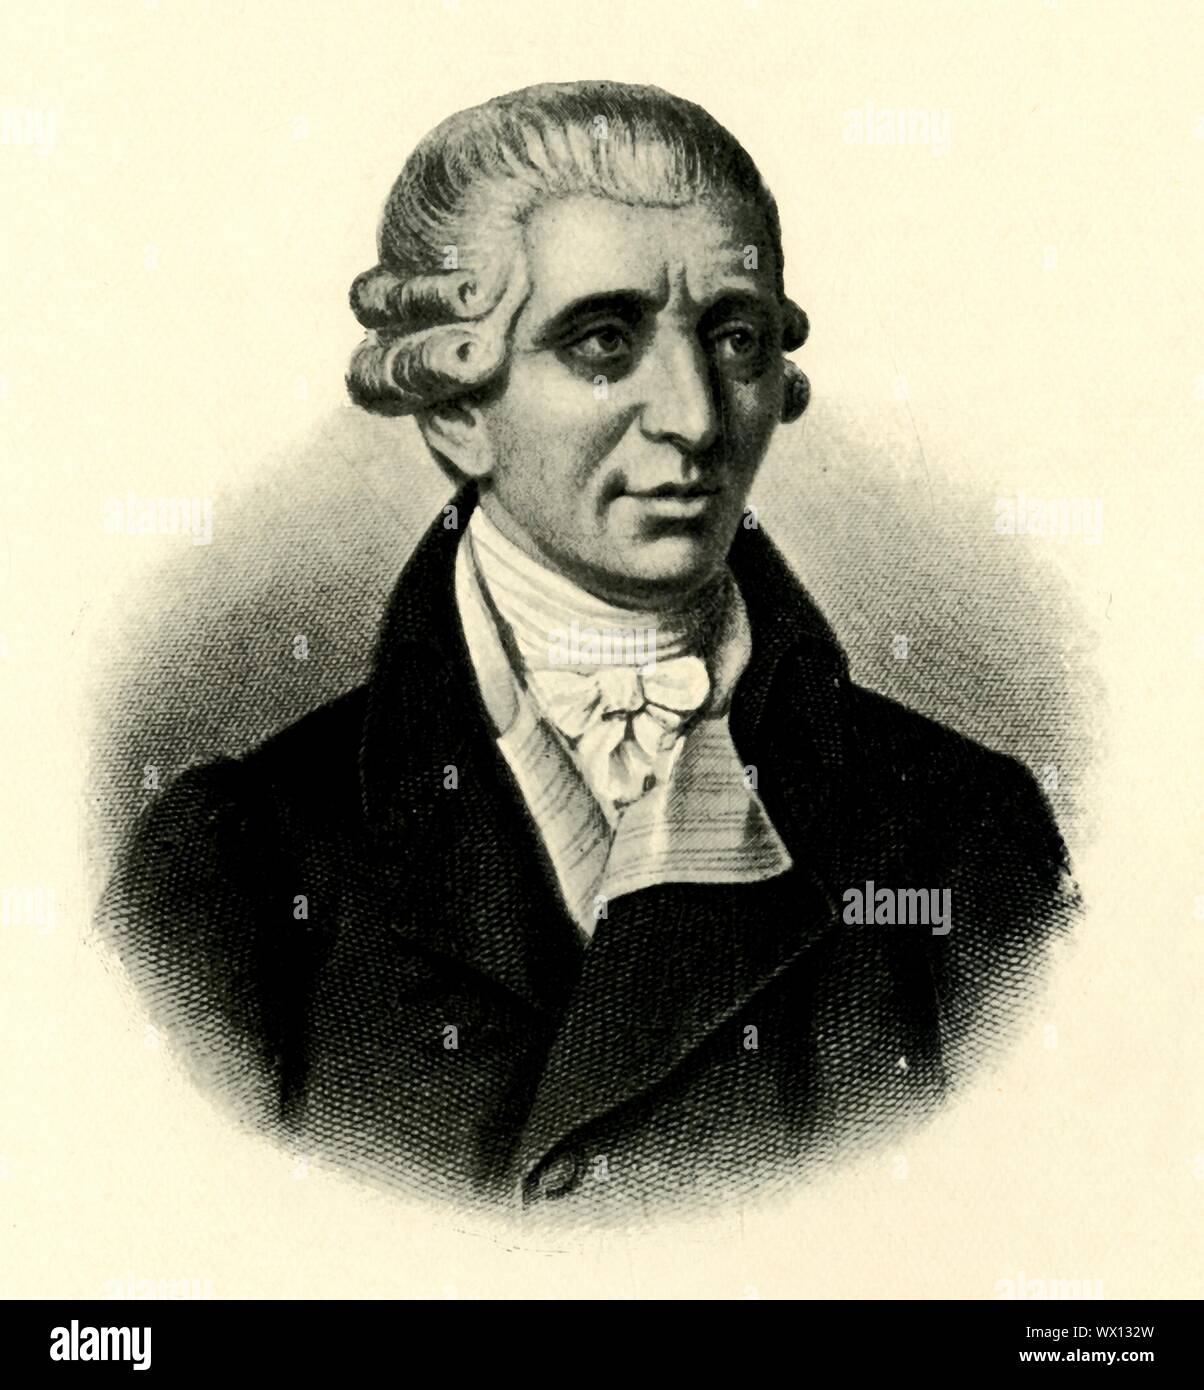 'Haydn', late 18th century, (1907). Portrait of Austrian composer Franz Joseph Haydn (1732-1809). From &quot;Story-Lives of Great Musicians&quot;, by F.J. Rowbotham. [Wells Gardner, Darton &amp; Co. Ltd, London, 1907] Stock Photo